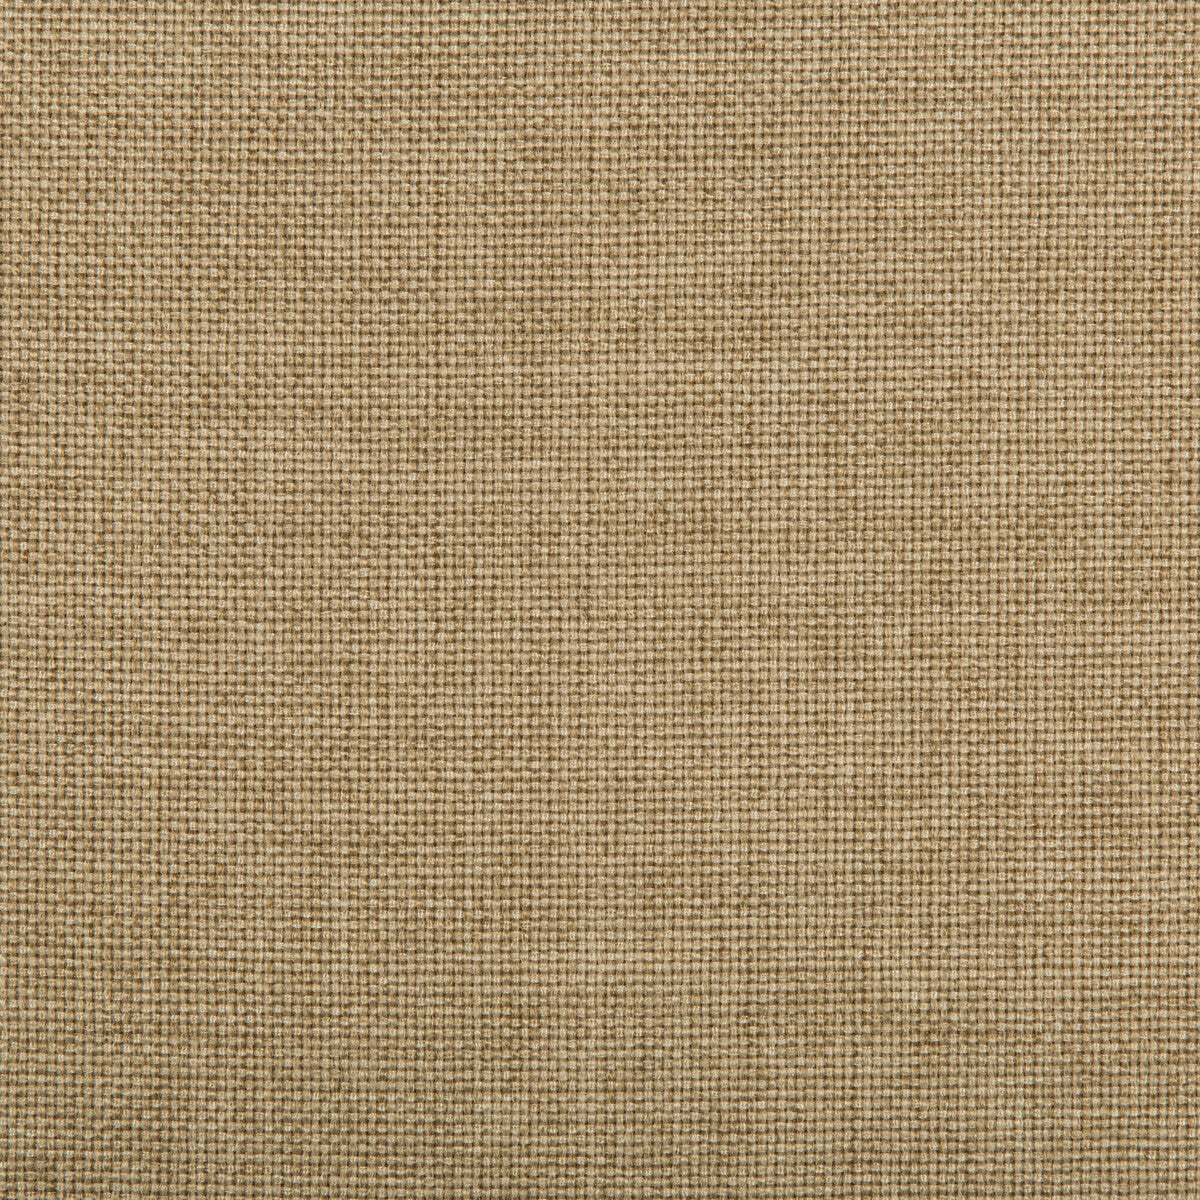 Kravet Contract fabric in 4637-16 color - pattern 4637.16.0 - by Kravet Contract